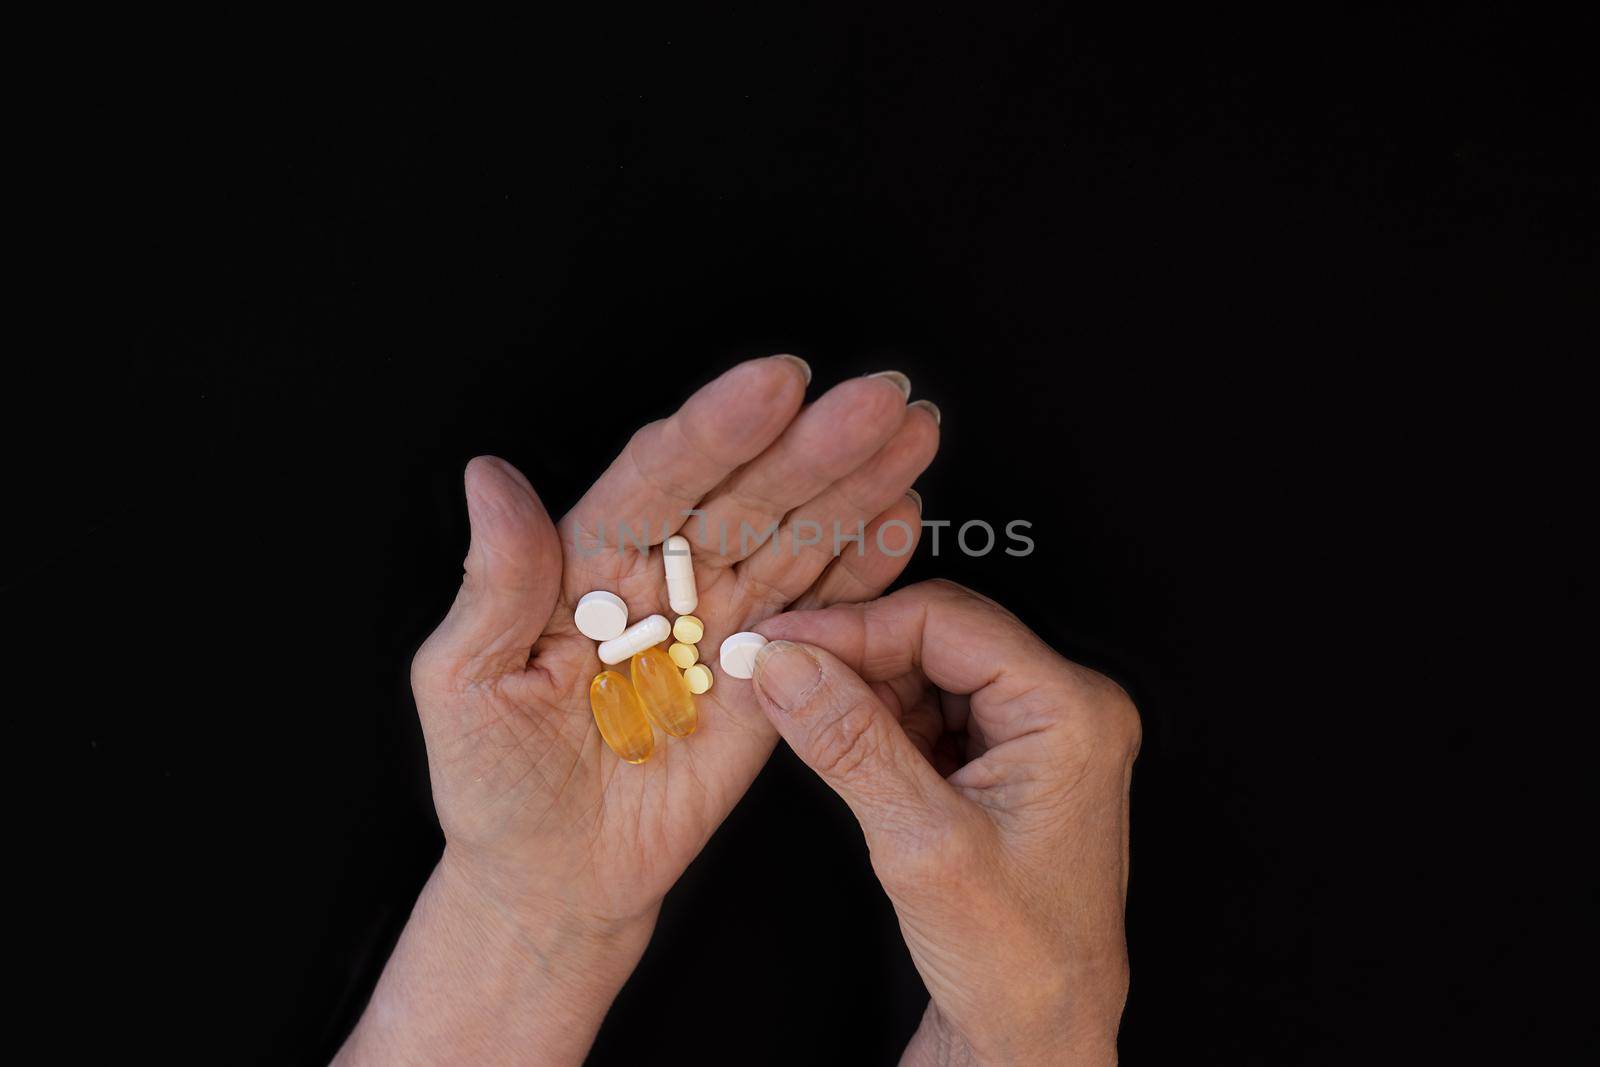 Close-up, the hands of an elderly woman chooses a pill for pressure. Black background, copy paste for your text. The concept of health prevention, taking vitamins and minerals, maintaining the body.